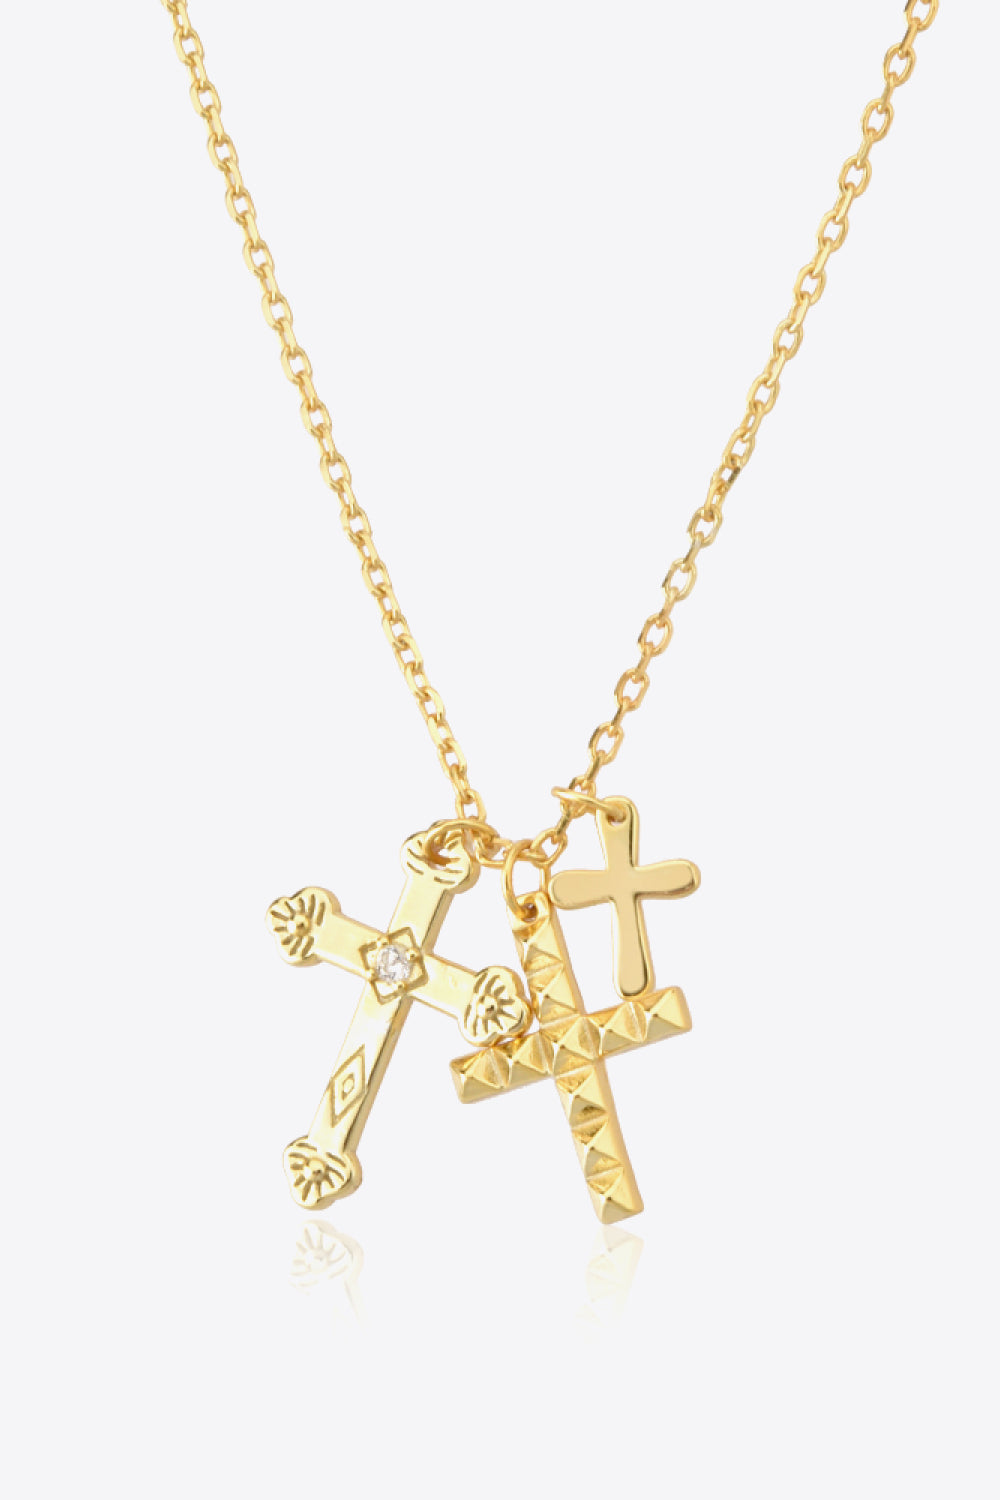 Inlaid Zircon Cross Pendant 925 Sterling Silver Necklace - Necklaces - FITGGINS